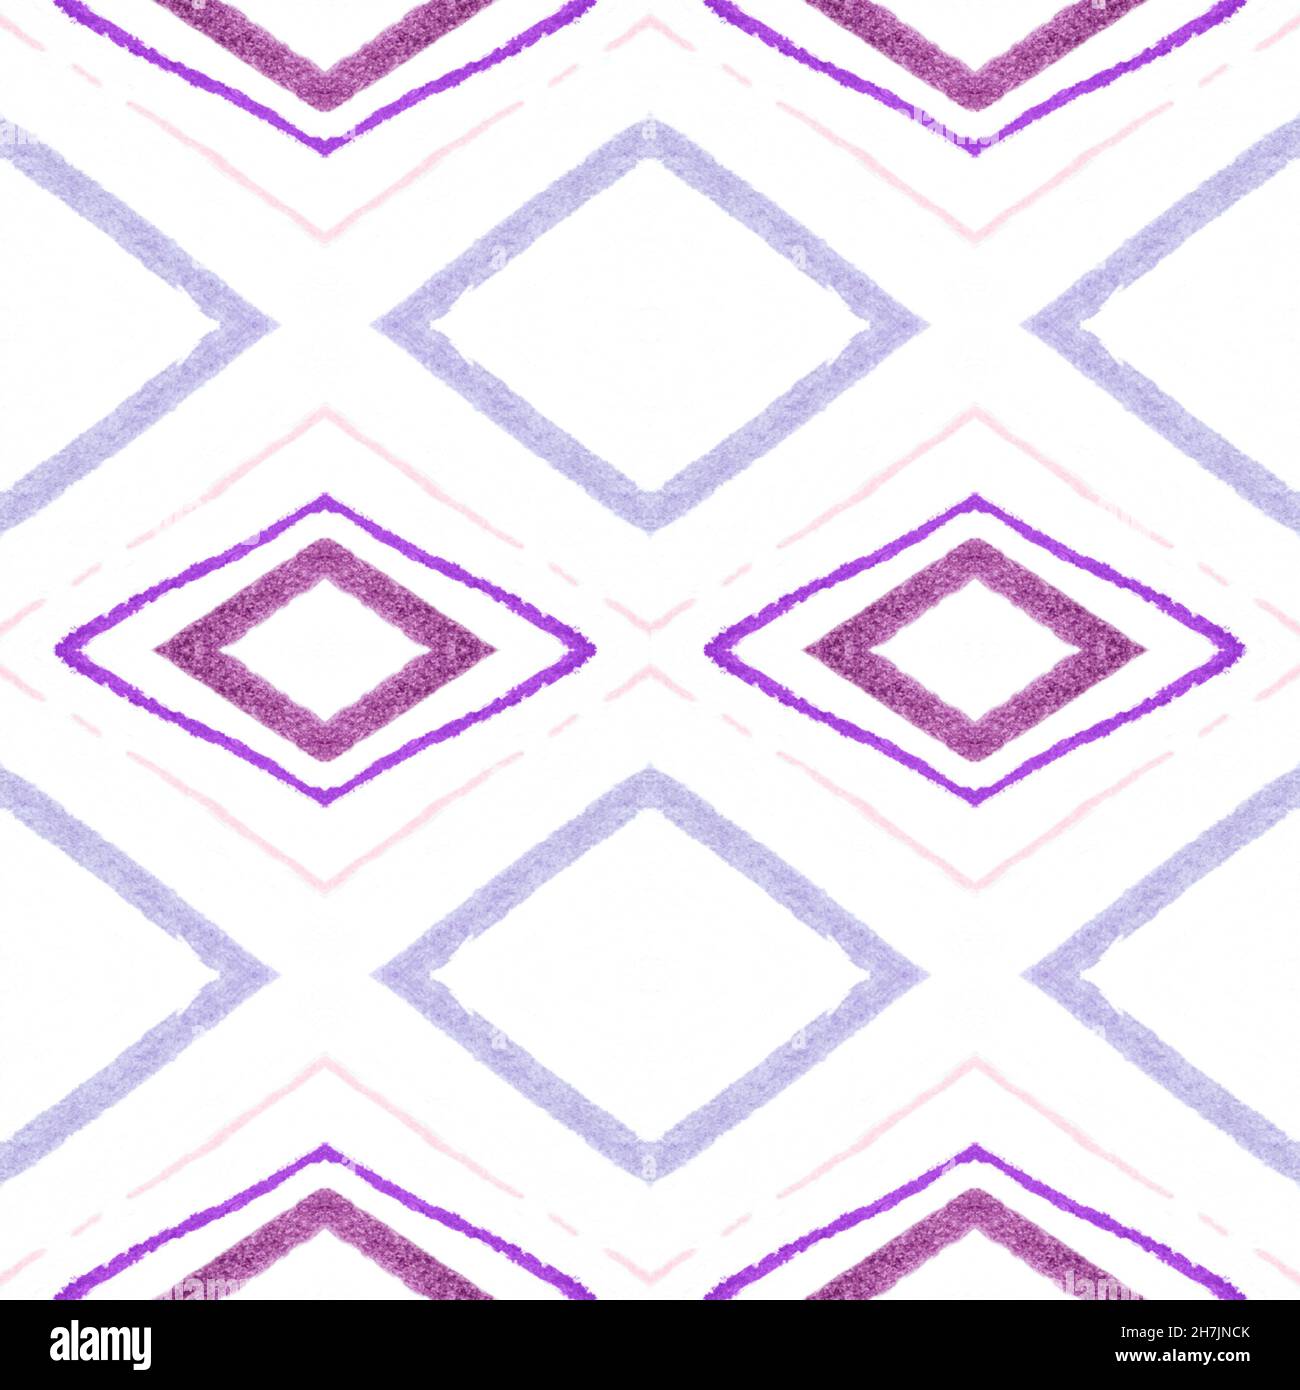 Drawn in Bold Mexican Pattern. Seamless Stock Photo